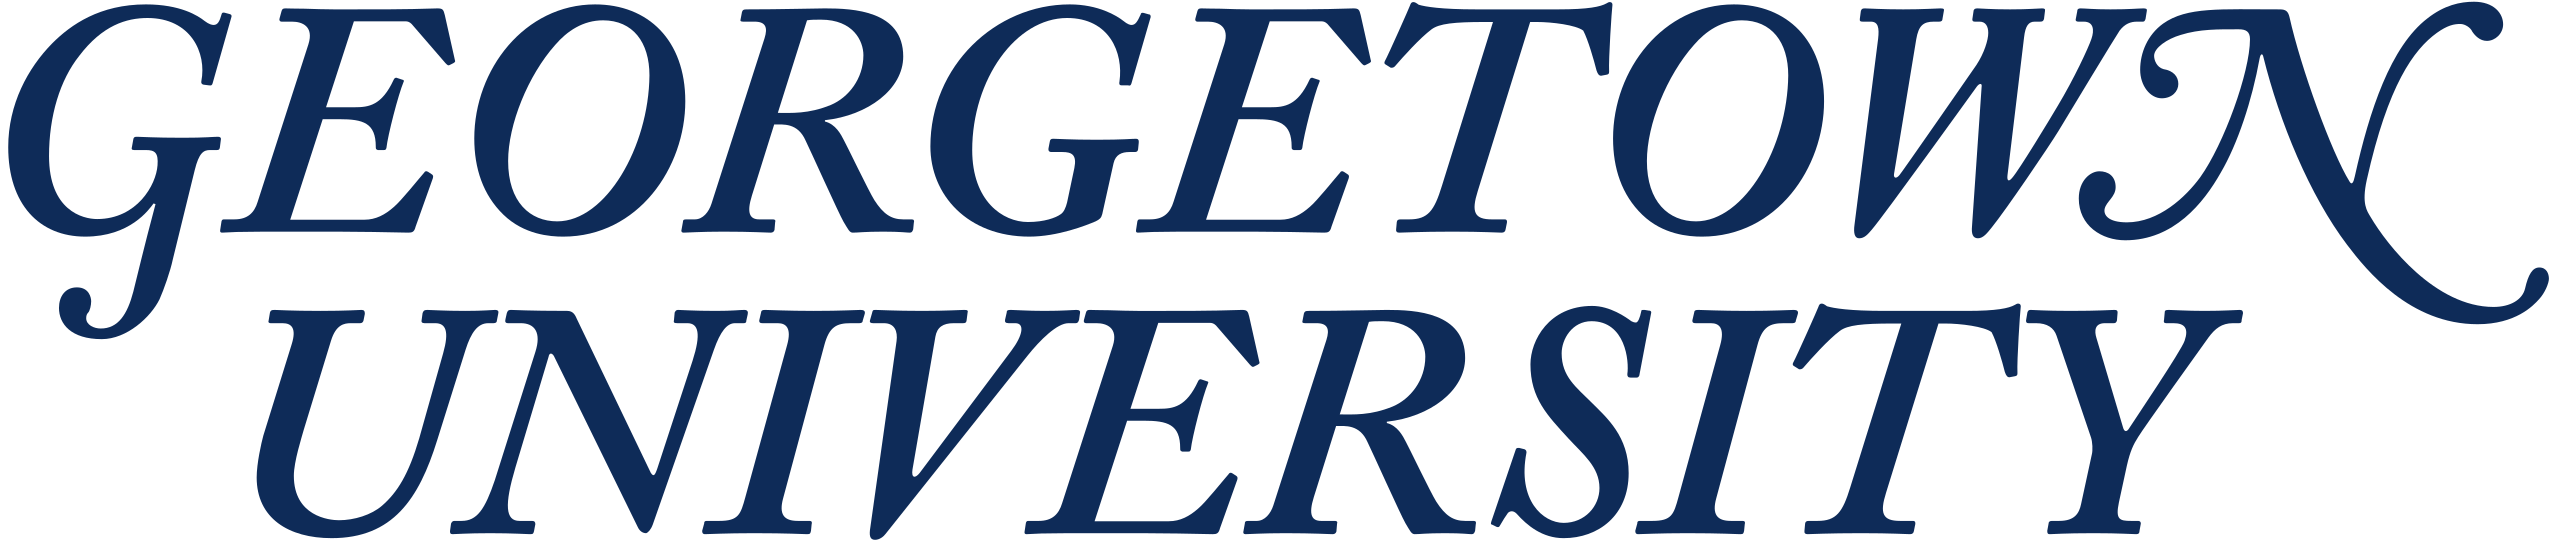 Georgetown University Logotype.svg Instantly Interpret Free: Legalese Decoder - AI Lawyer Translate Legal docs to plain English